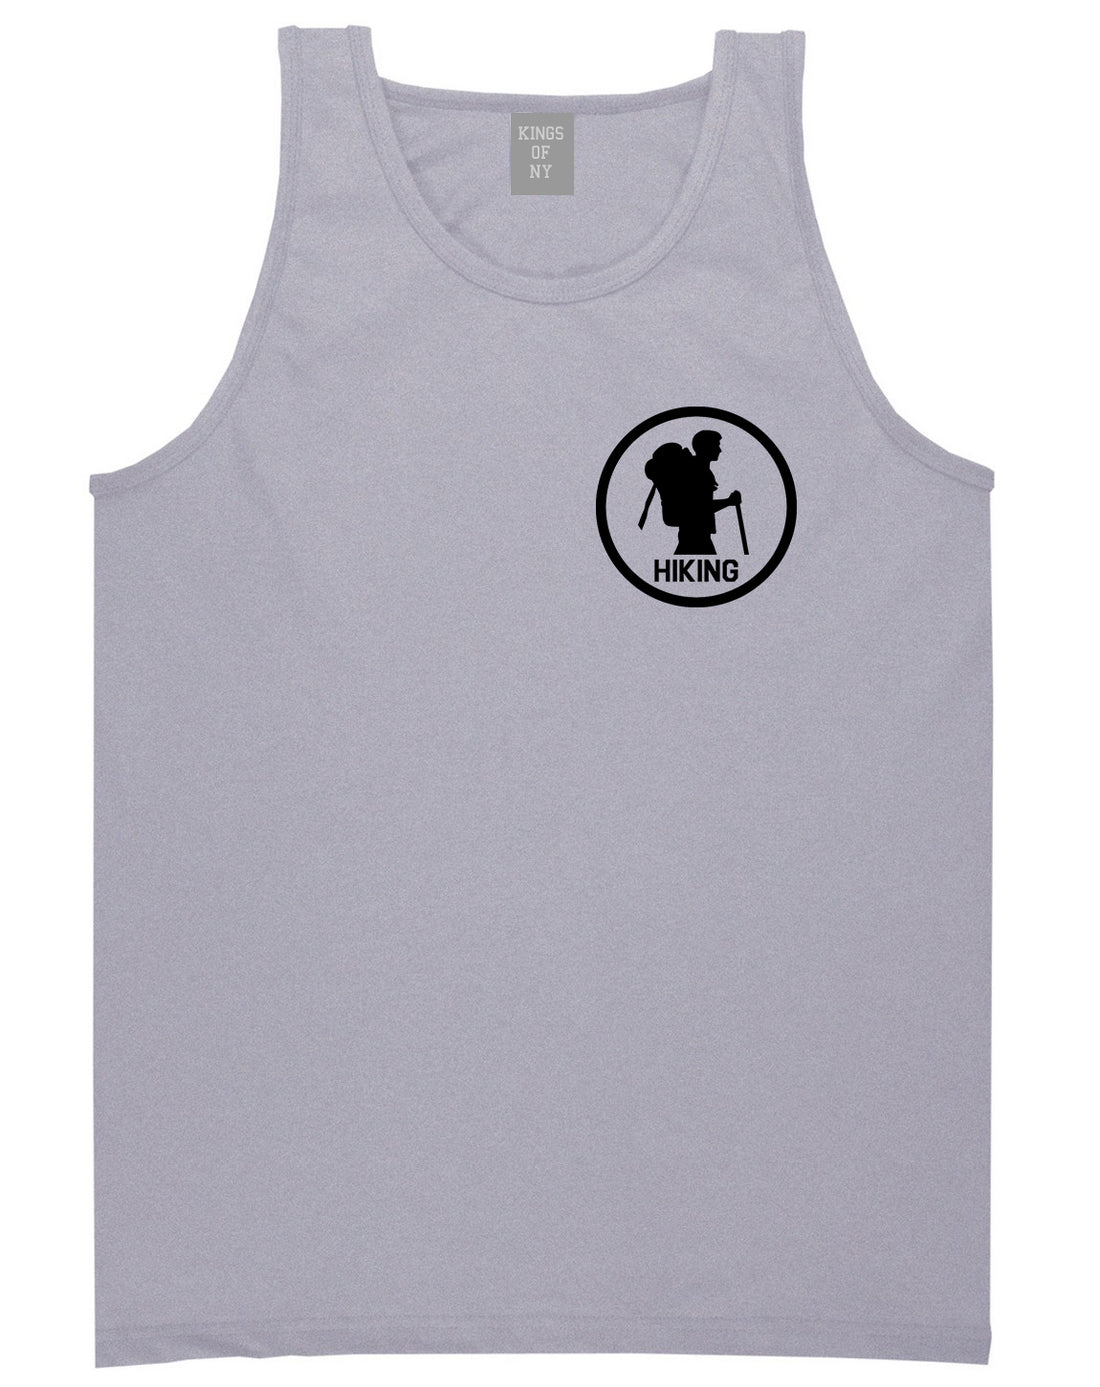 Backpacking Outdoor Hiking Chest Grey Tank Top Shirt by Kings Of NY